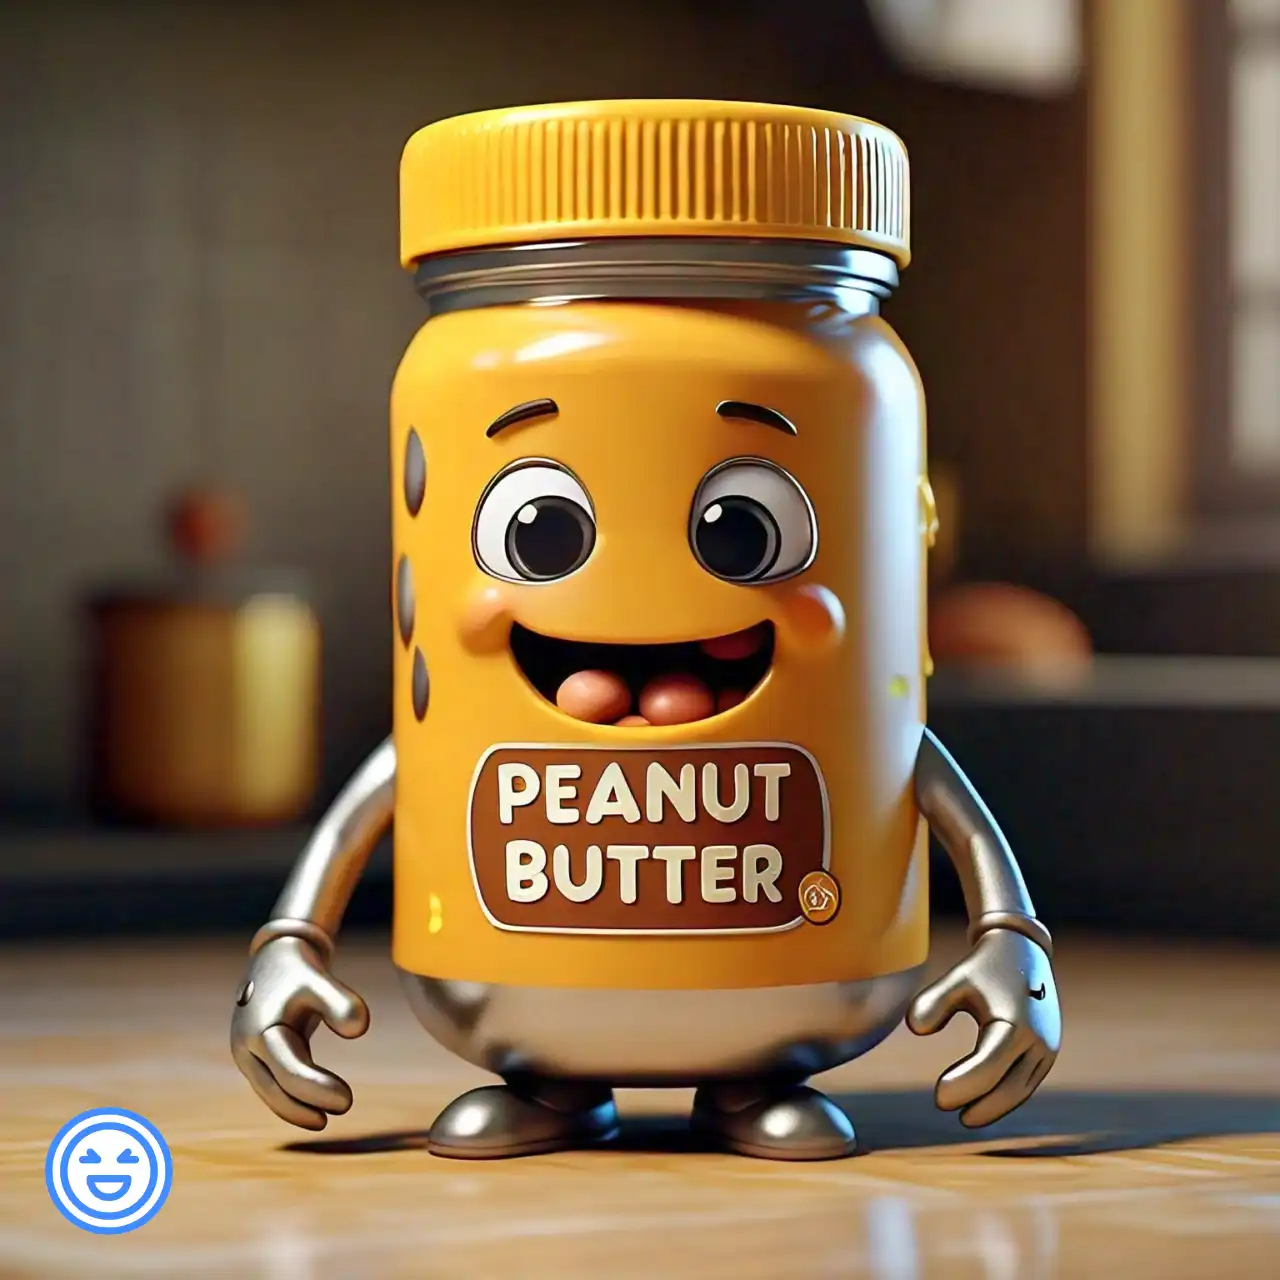 funny Peanut Butter jokes and one liner clever Peanut Butter puns 1 at PunnyPeak.com